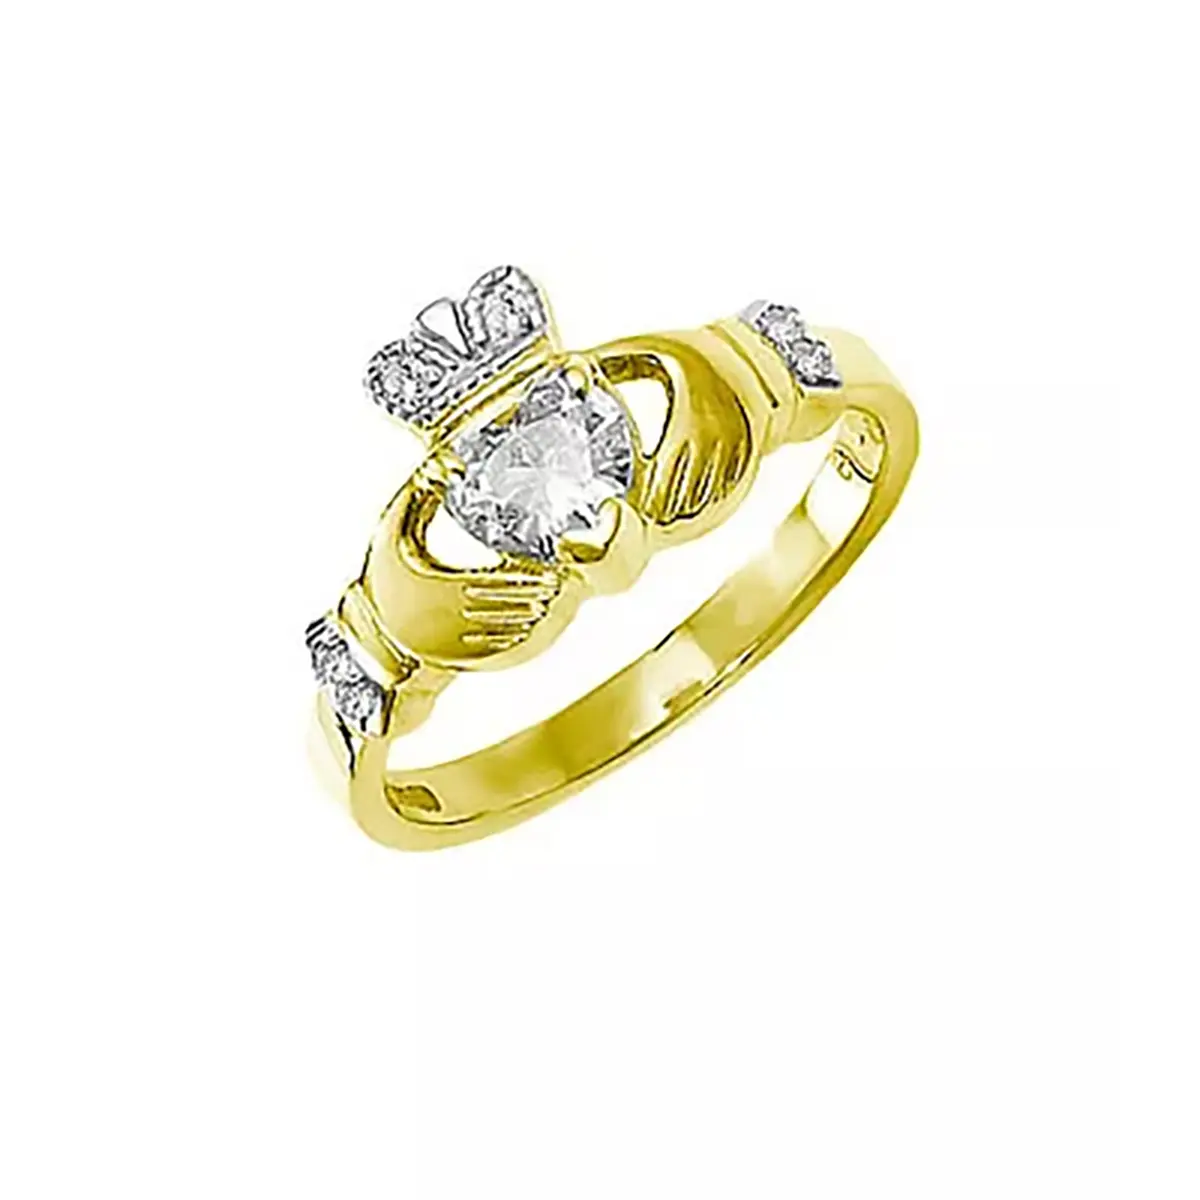 Handcrafted Full Heart Diamond Claddagh Engagement Ring